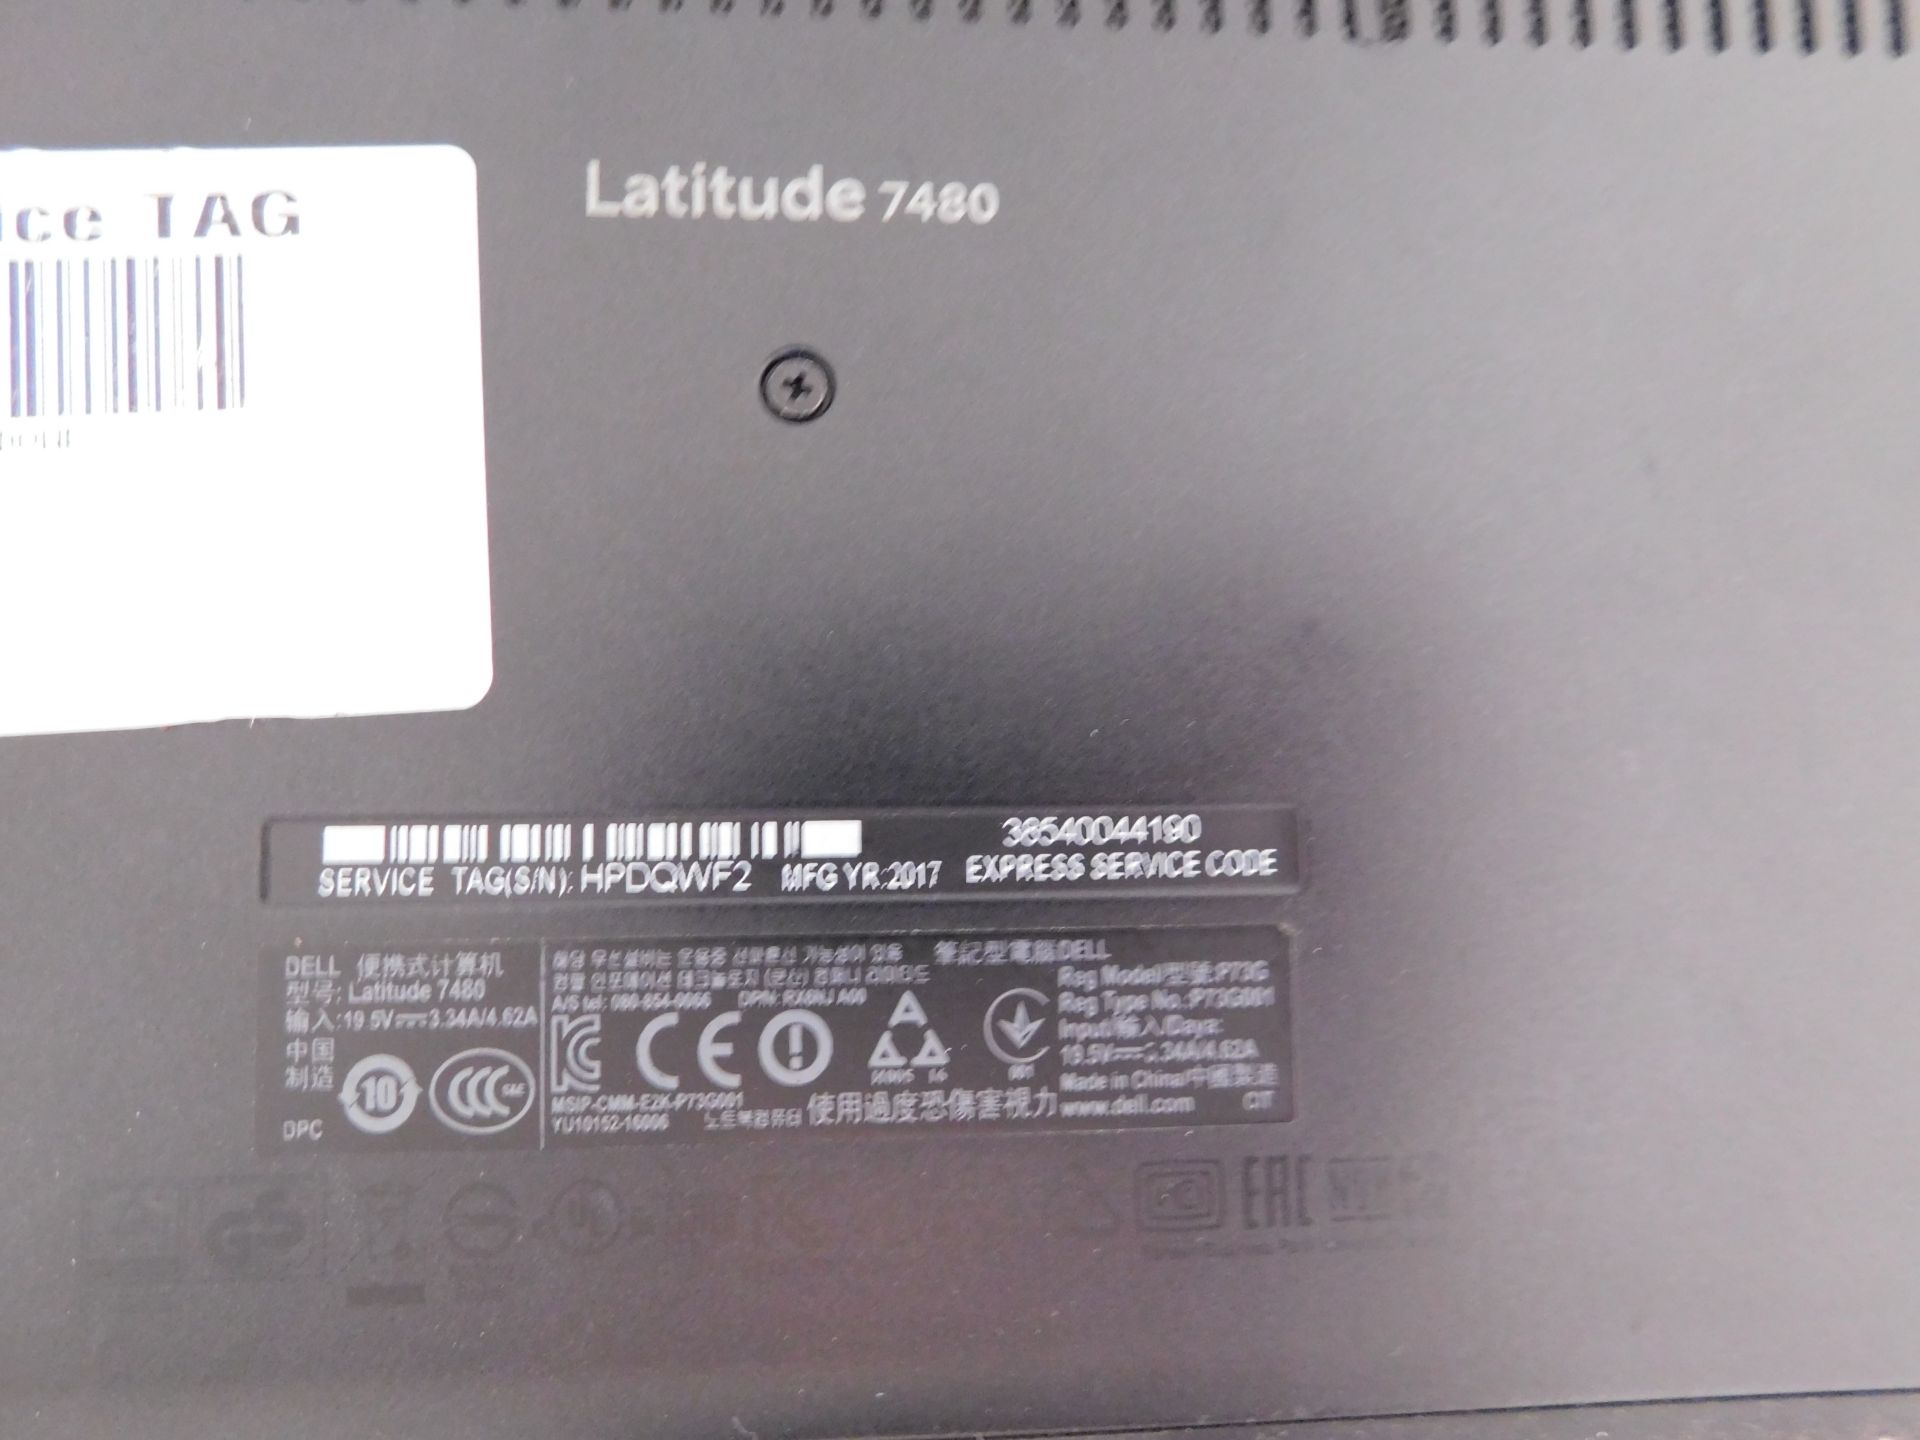 Dell Latitude 7480 Laptop, i5, No PSU (No HDD) (Location Stockport. Please Refer to General Notes) - Image 3 of 3